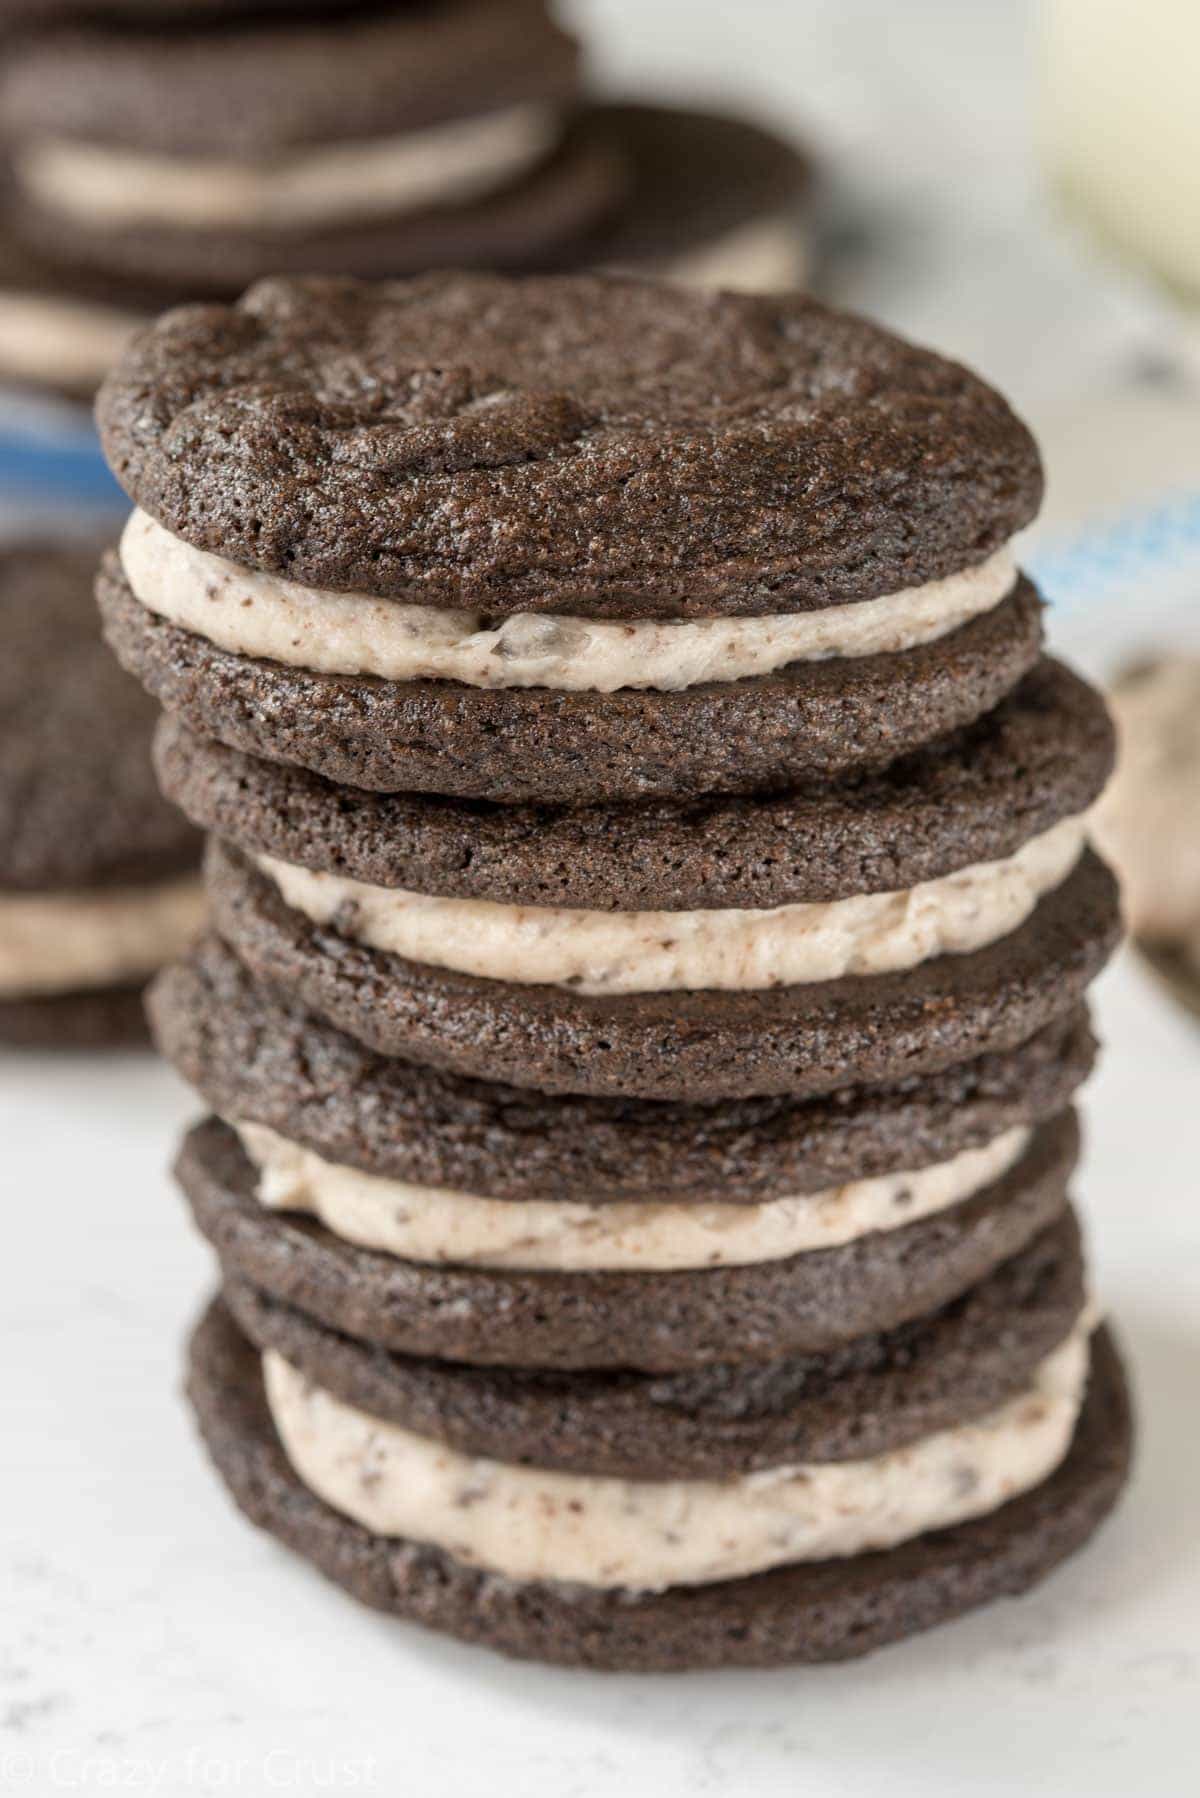 Homemade Cookies 'n Cream Oreos - this easy recipe is completely from scratch! Make soft homemade Oreos and fill them with a cookies 'n cream filling!